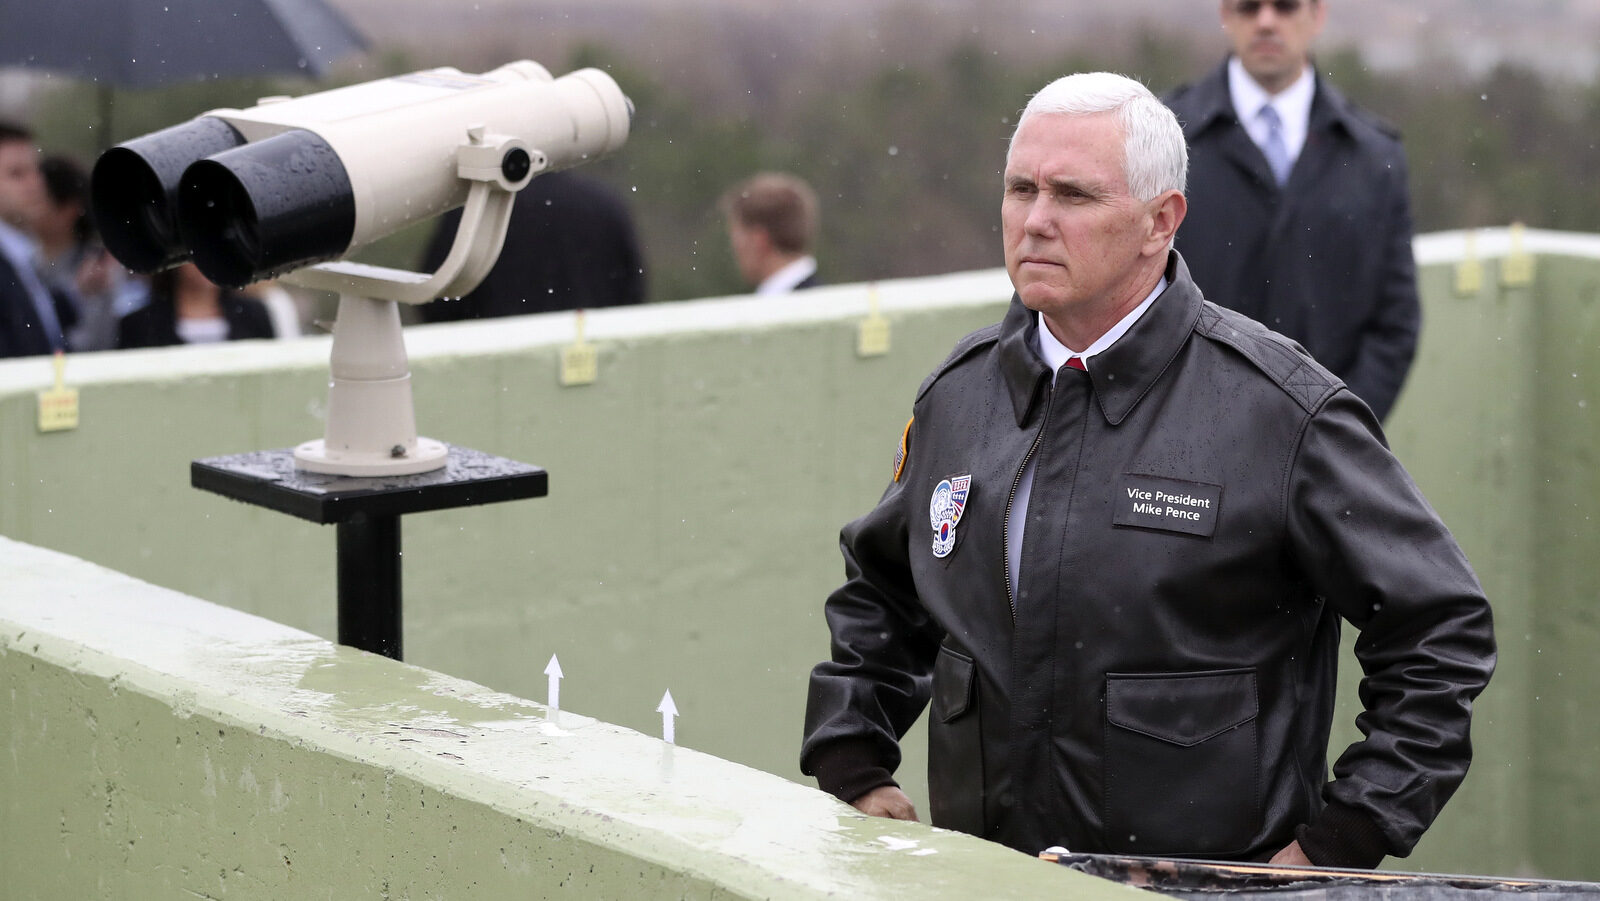 U.S. Vice President Mike Pence looks at the North side from Observation Post Ouellette in the Demilitarized Zone (DMZ), near the border village of Panmunjom, which has separated the two Koreas since the Korean War, South Korea, April 17, 2017. (AP/Lee Jin-man)